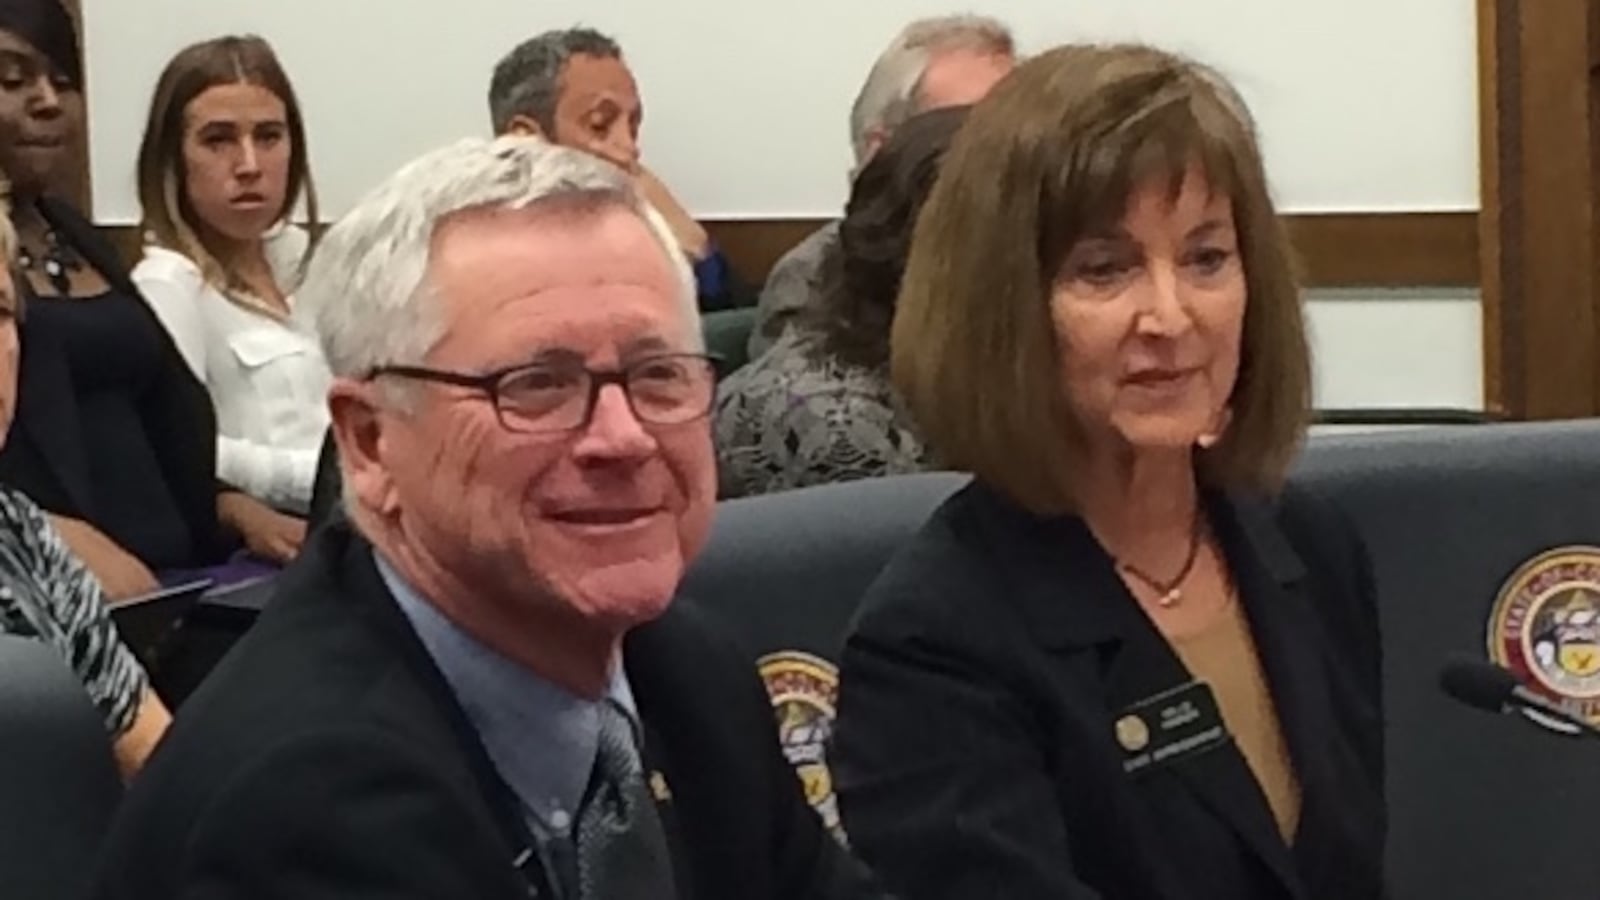 Reps. Bob Rankin and Millie Hamner had to defend their school finance bill against complaints that it was rushed.